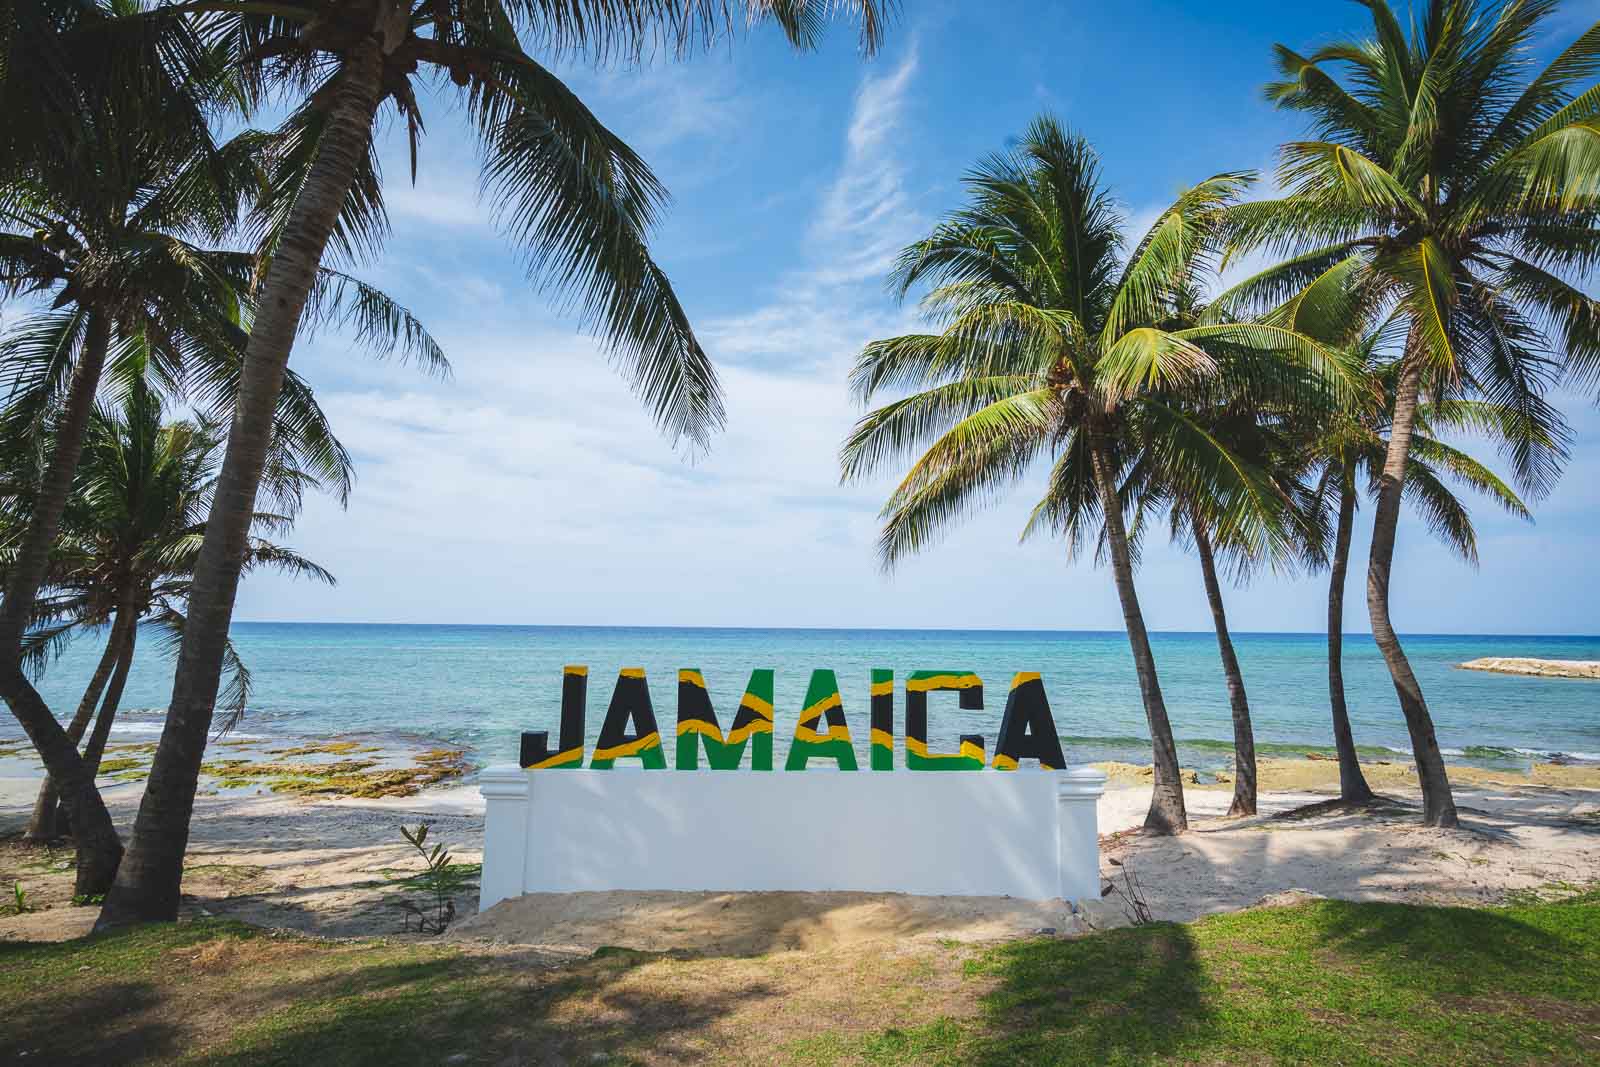 Facts about the Jamaican Flag